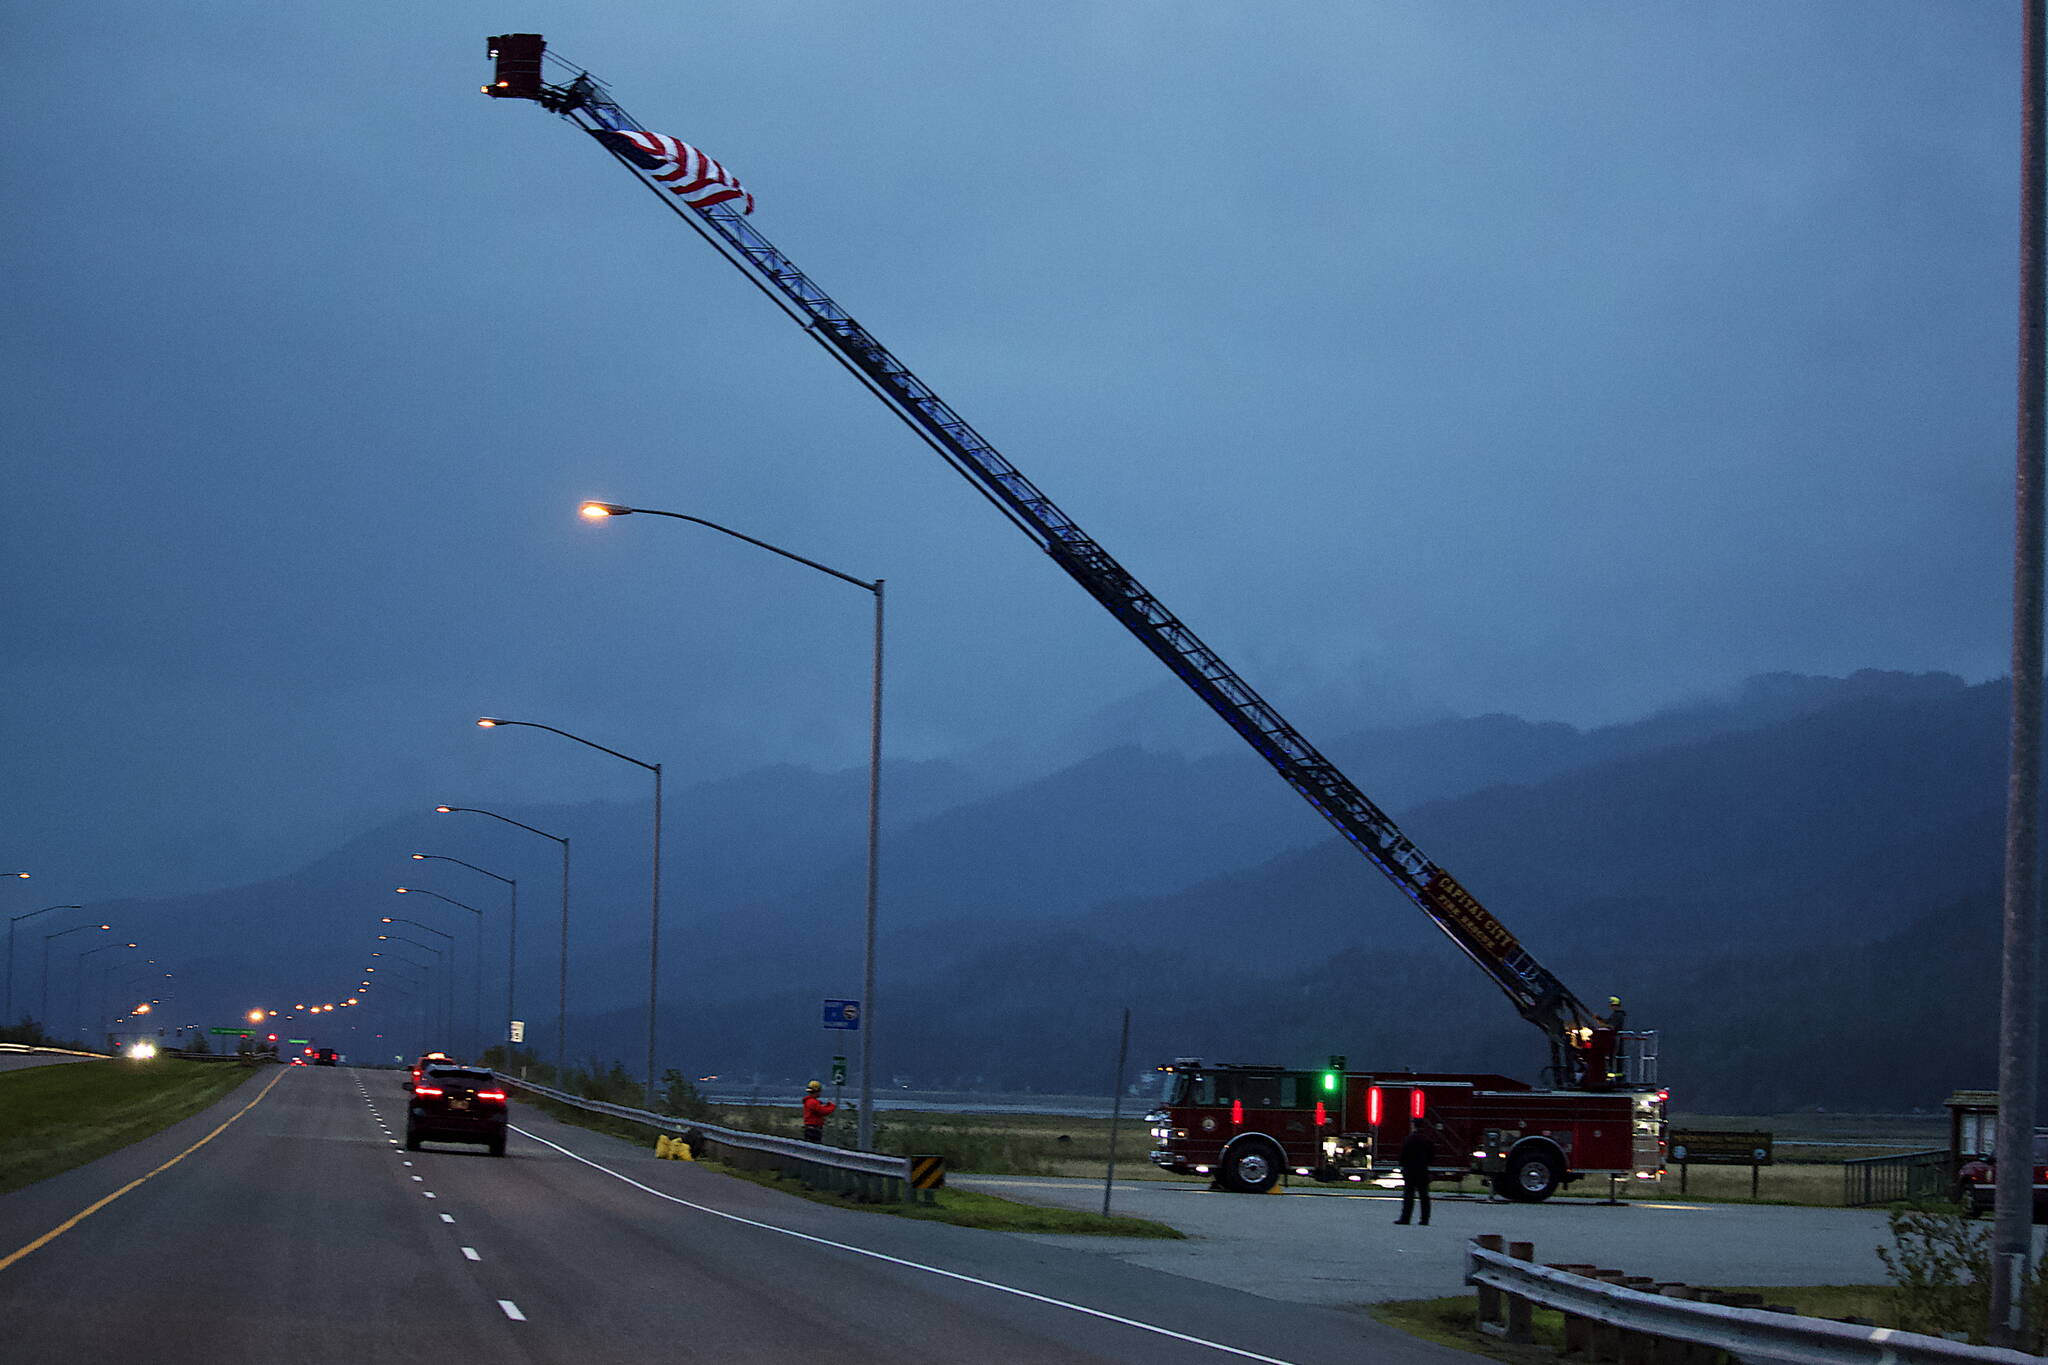 A lit-up Capital City Fire/Rescue truck hoists a flag over Egan Drive on Monday morning to commemorate the Sept. 11, 2001, terrorist attacks. (Mark Sabbatini / Juneau Empire)